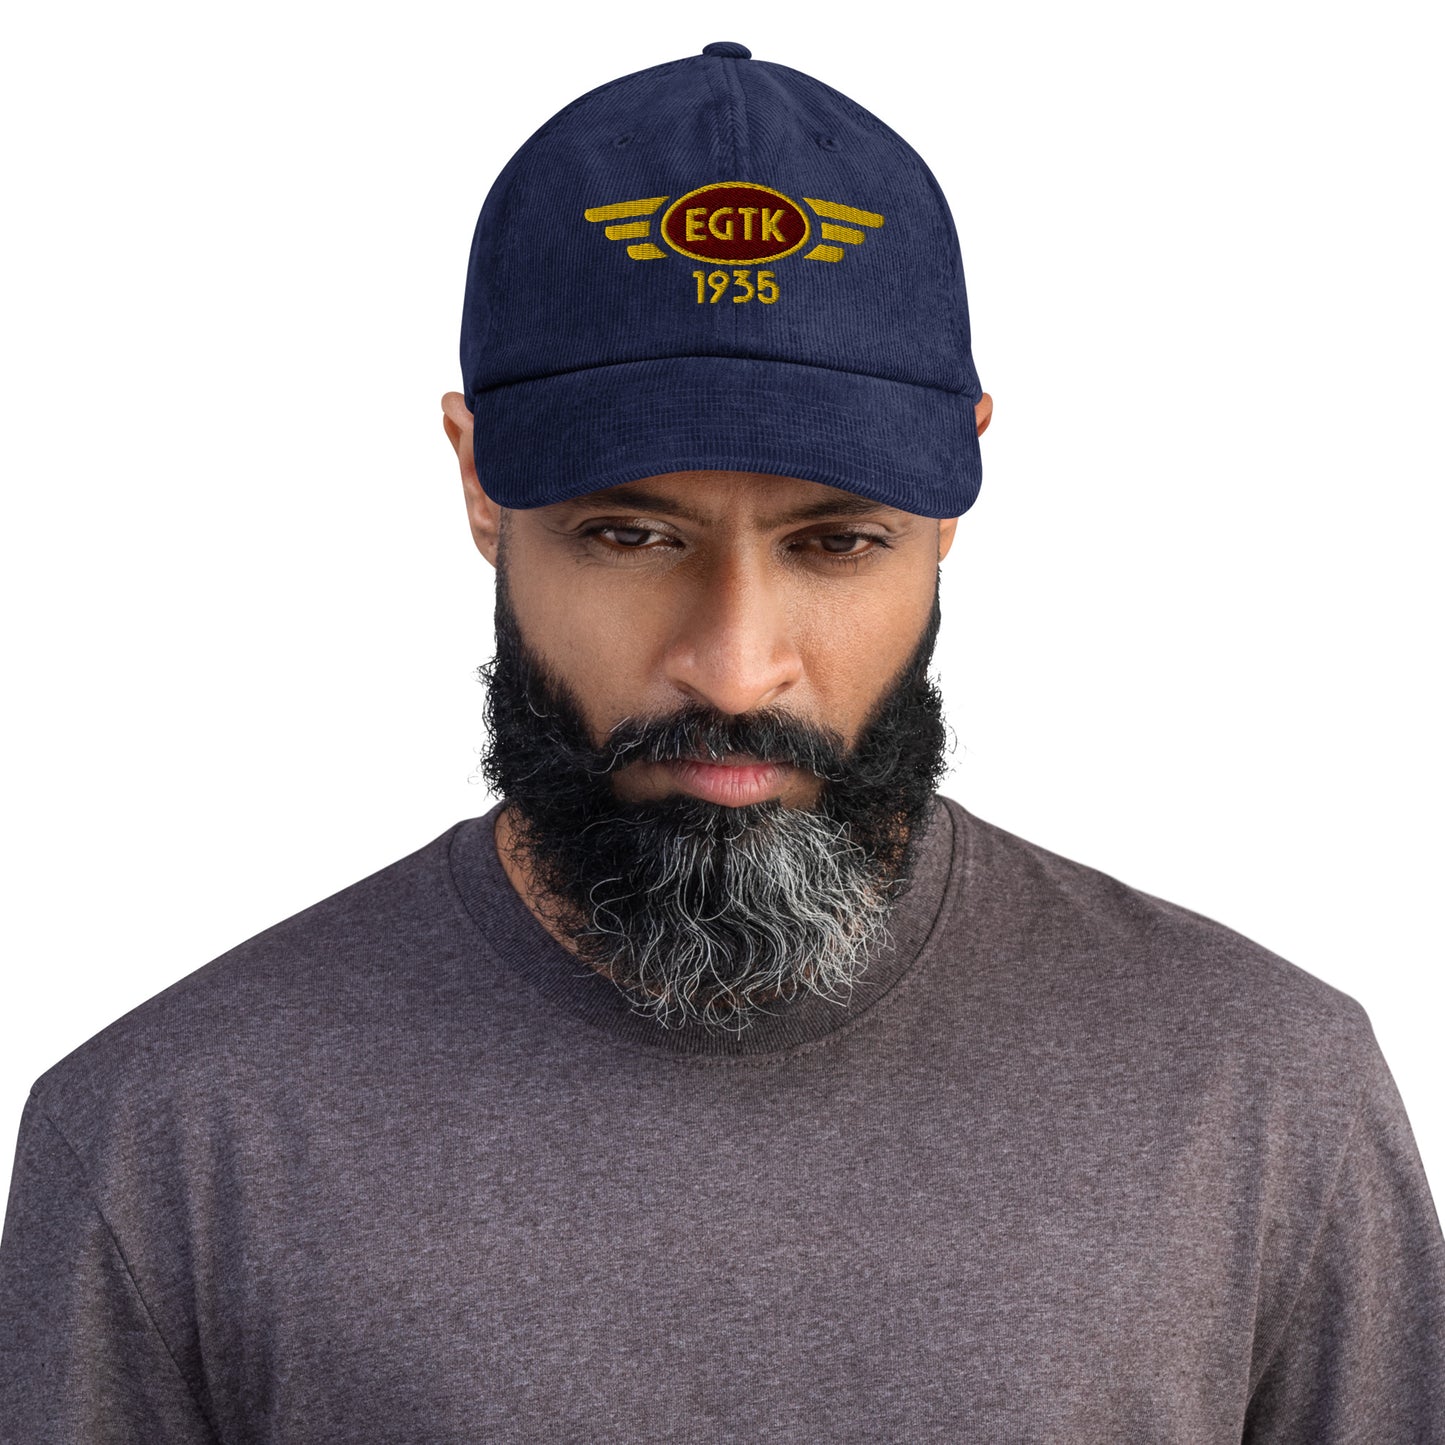 Kidlington Airport corduroy cap with embroidered ICAO code.